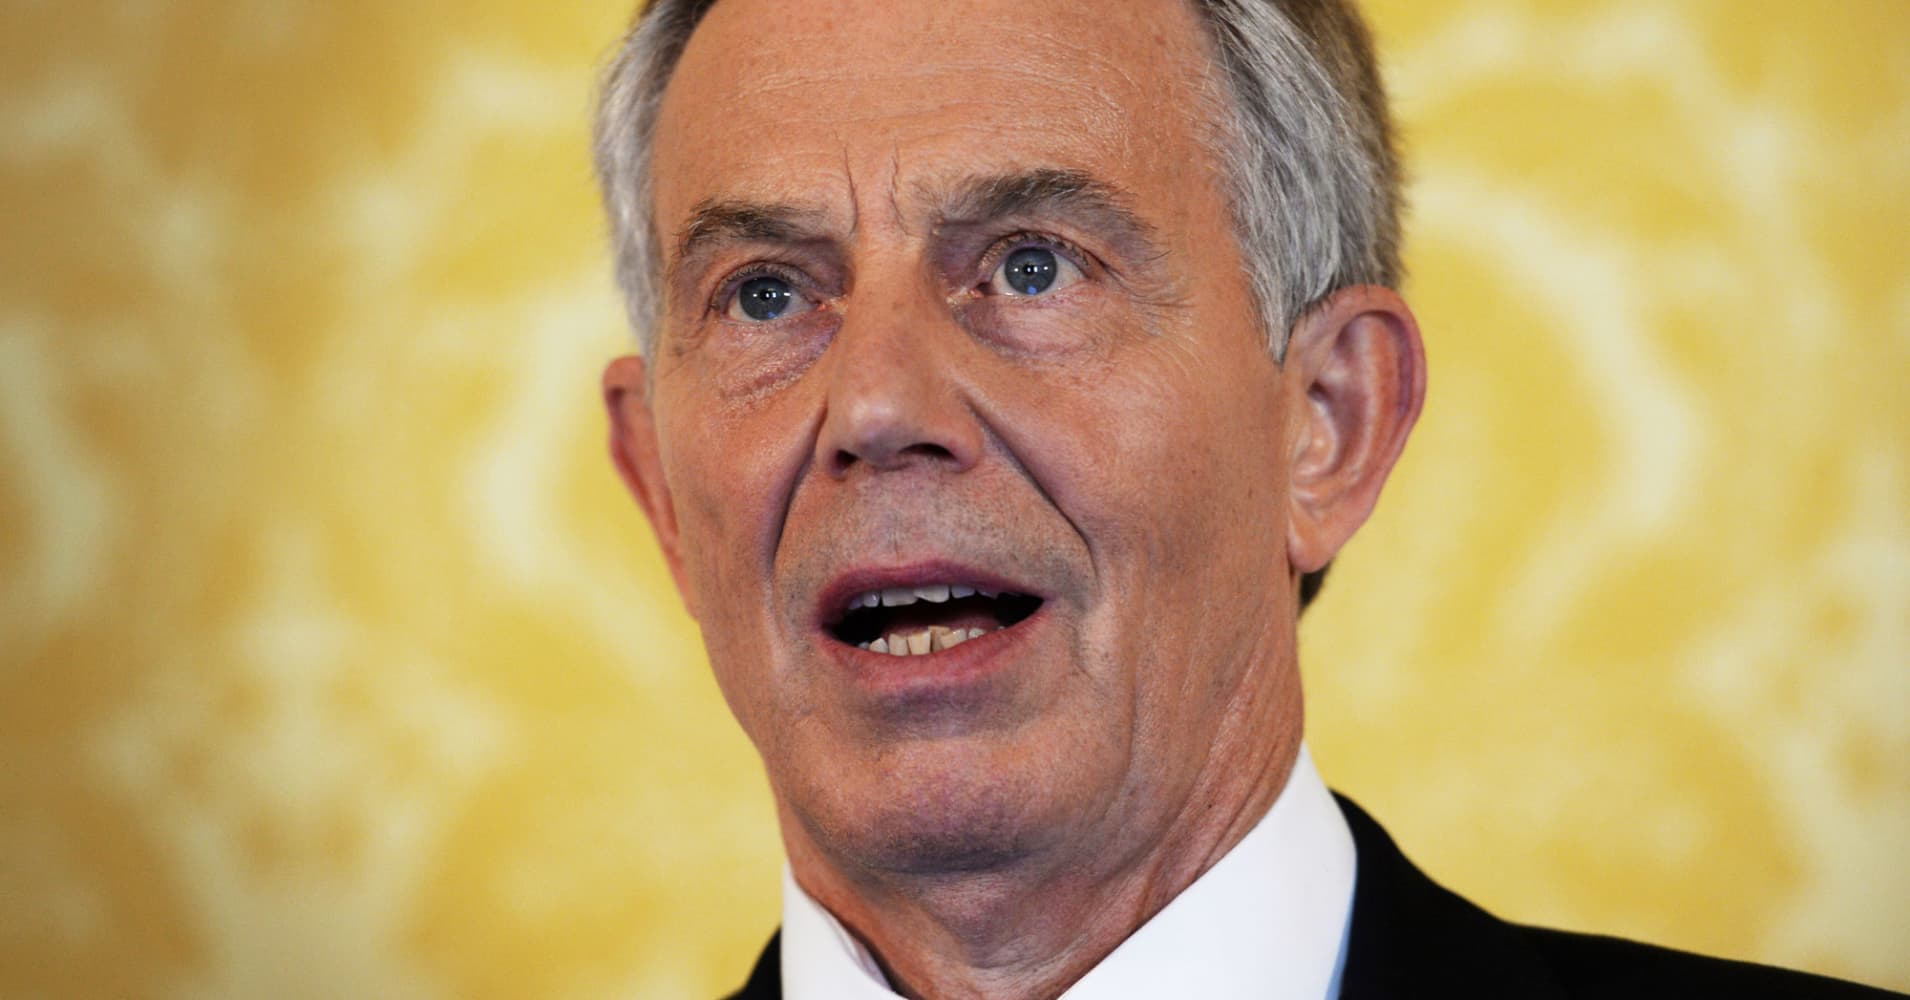 Tony Blair sees dangerous times ahead for Western democracies - CNBC